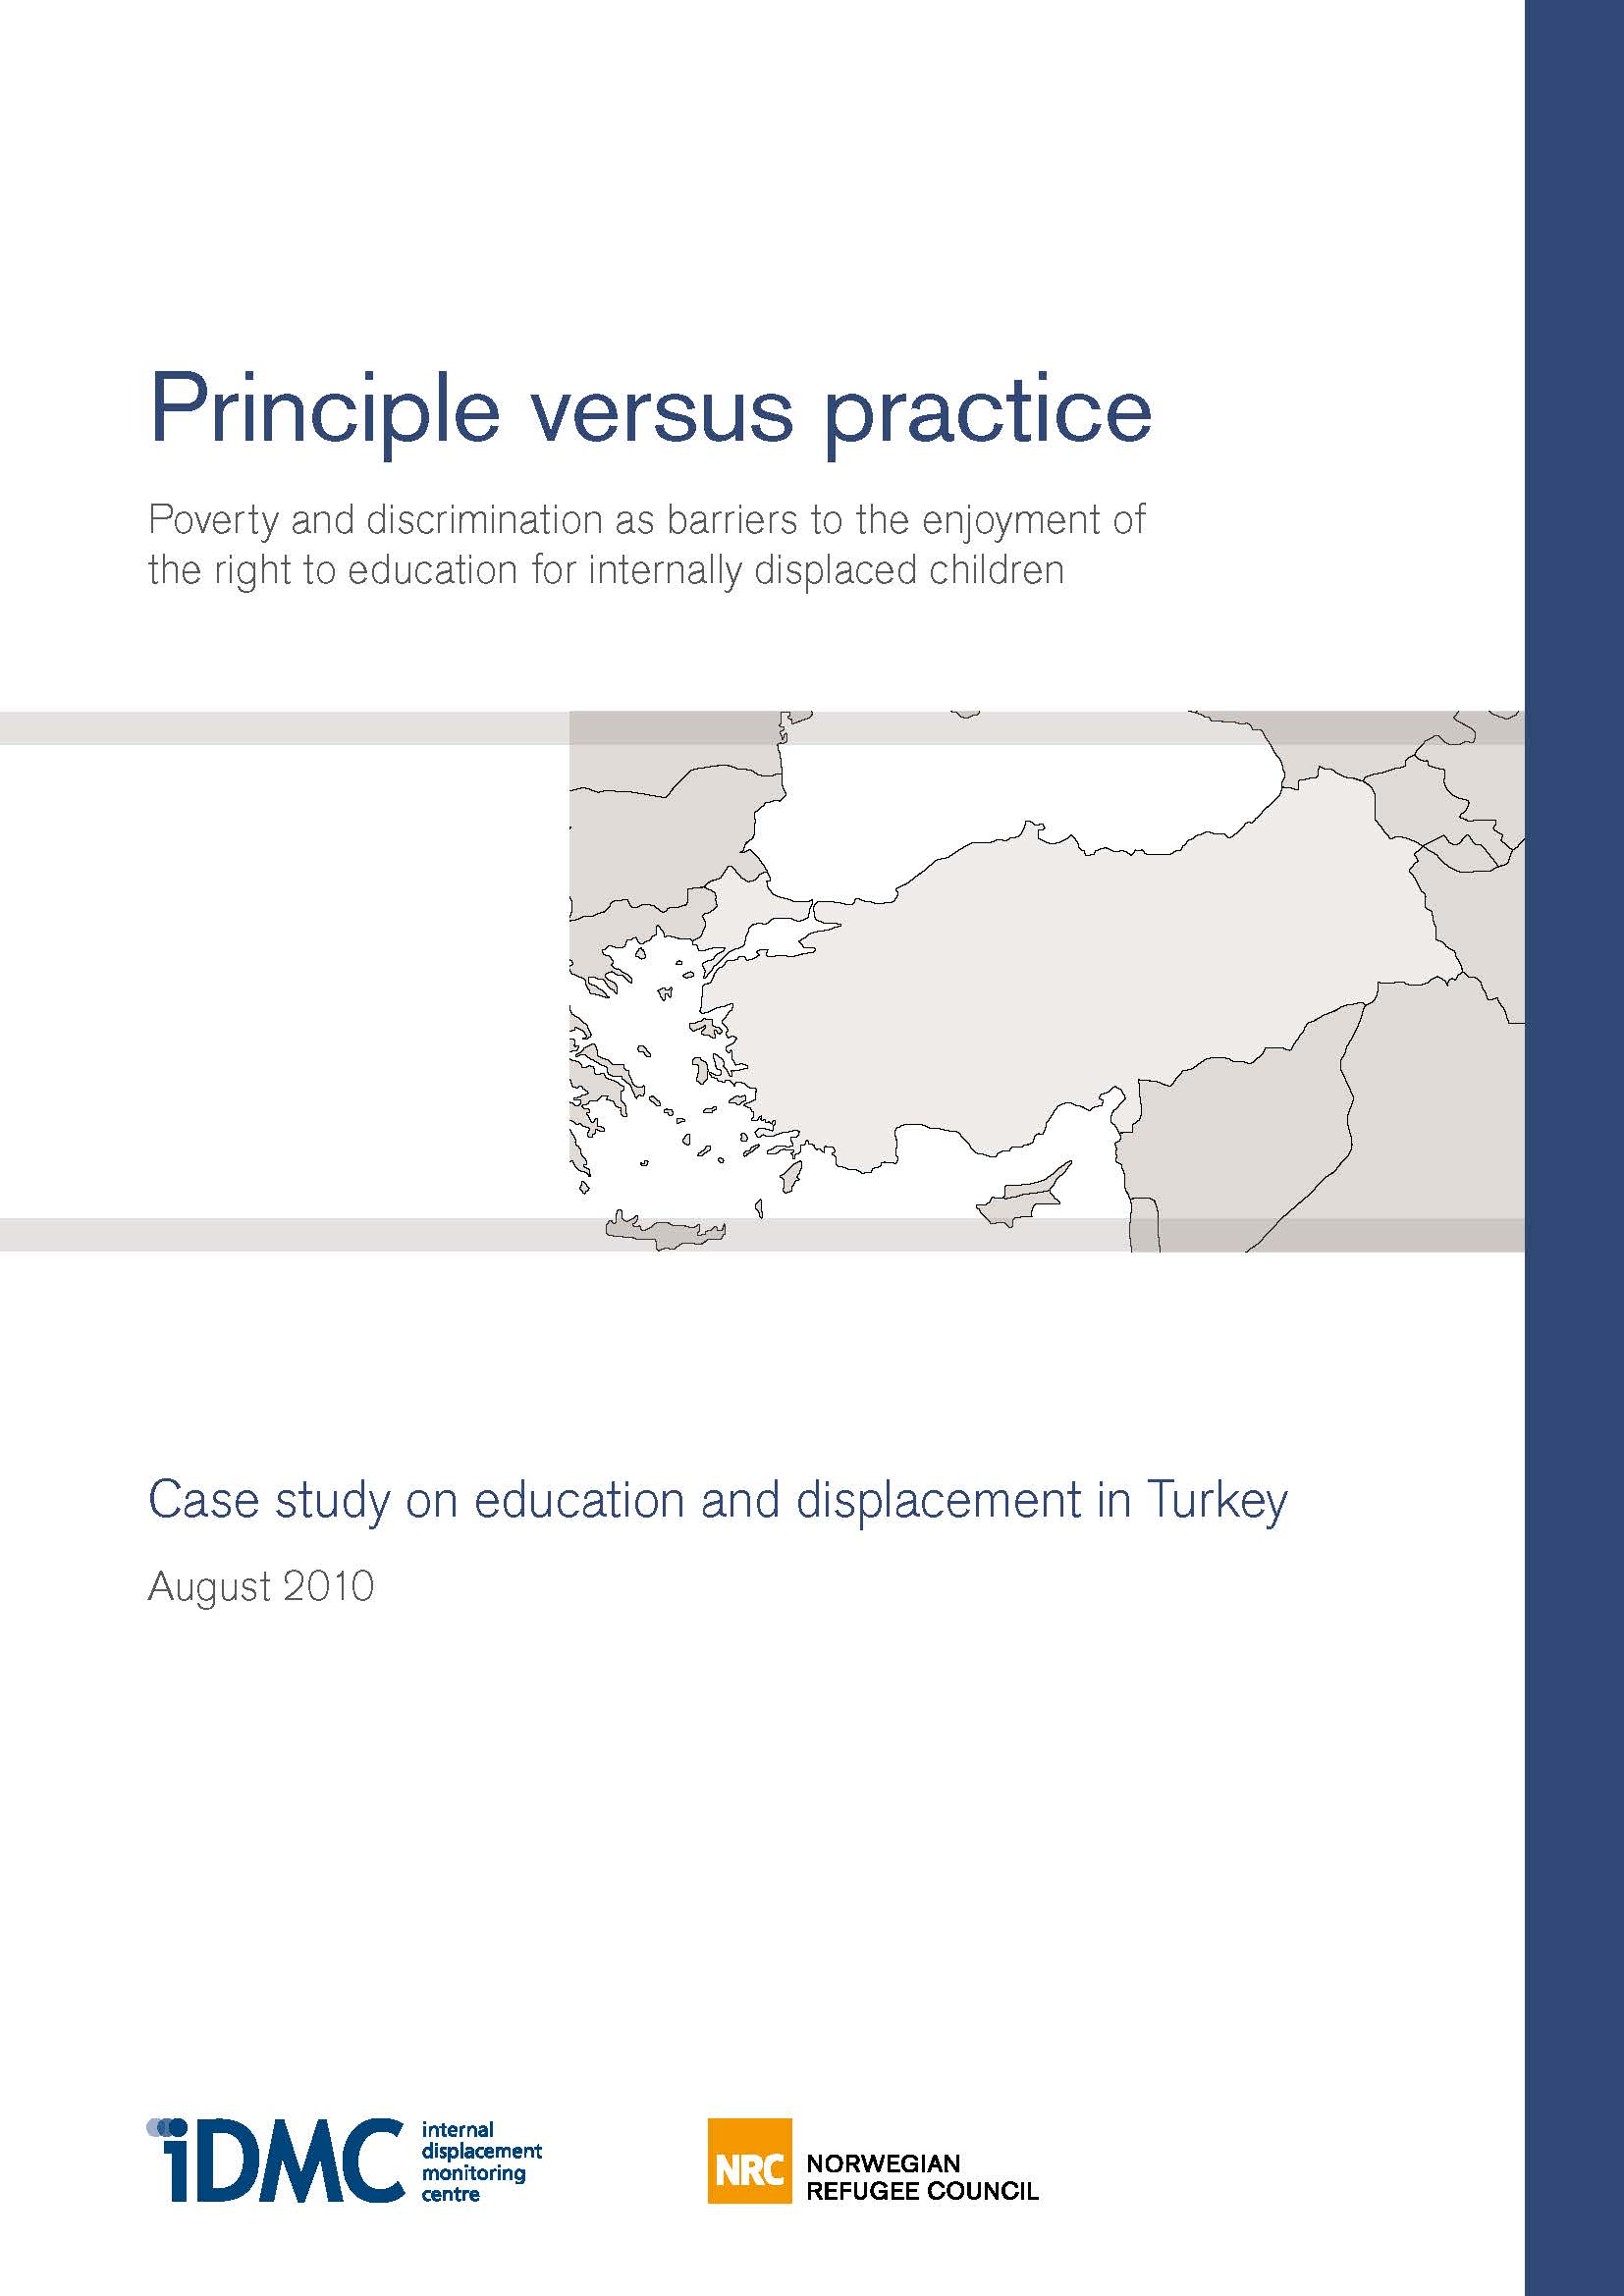 Principle Versus practice: Case study on education and displacement in Turkey